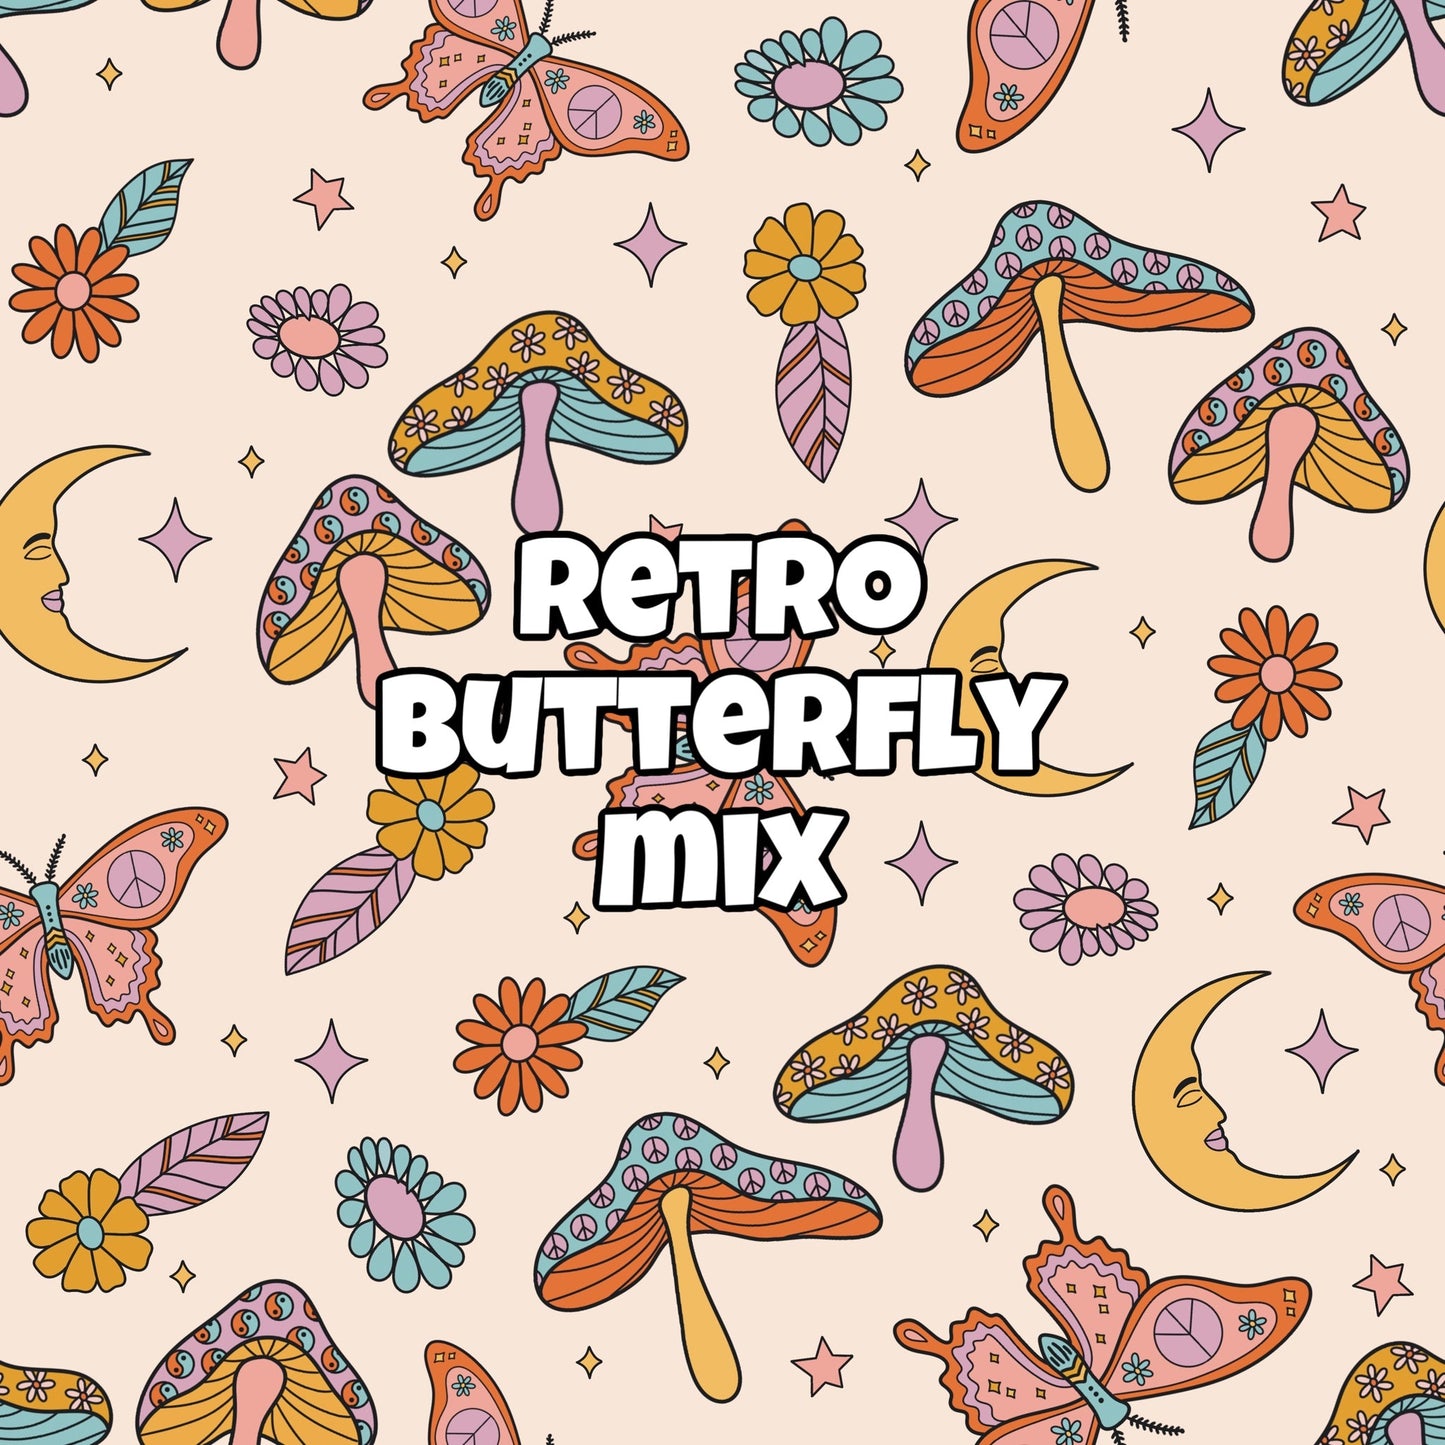 RETRO BUTTERFLY MIX